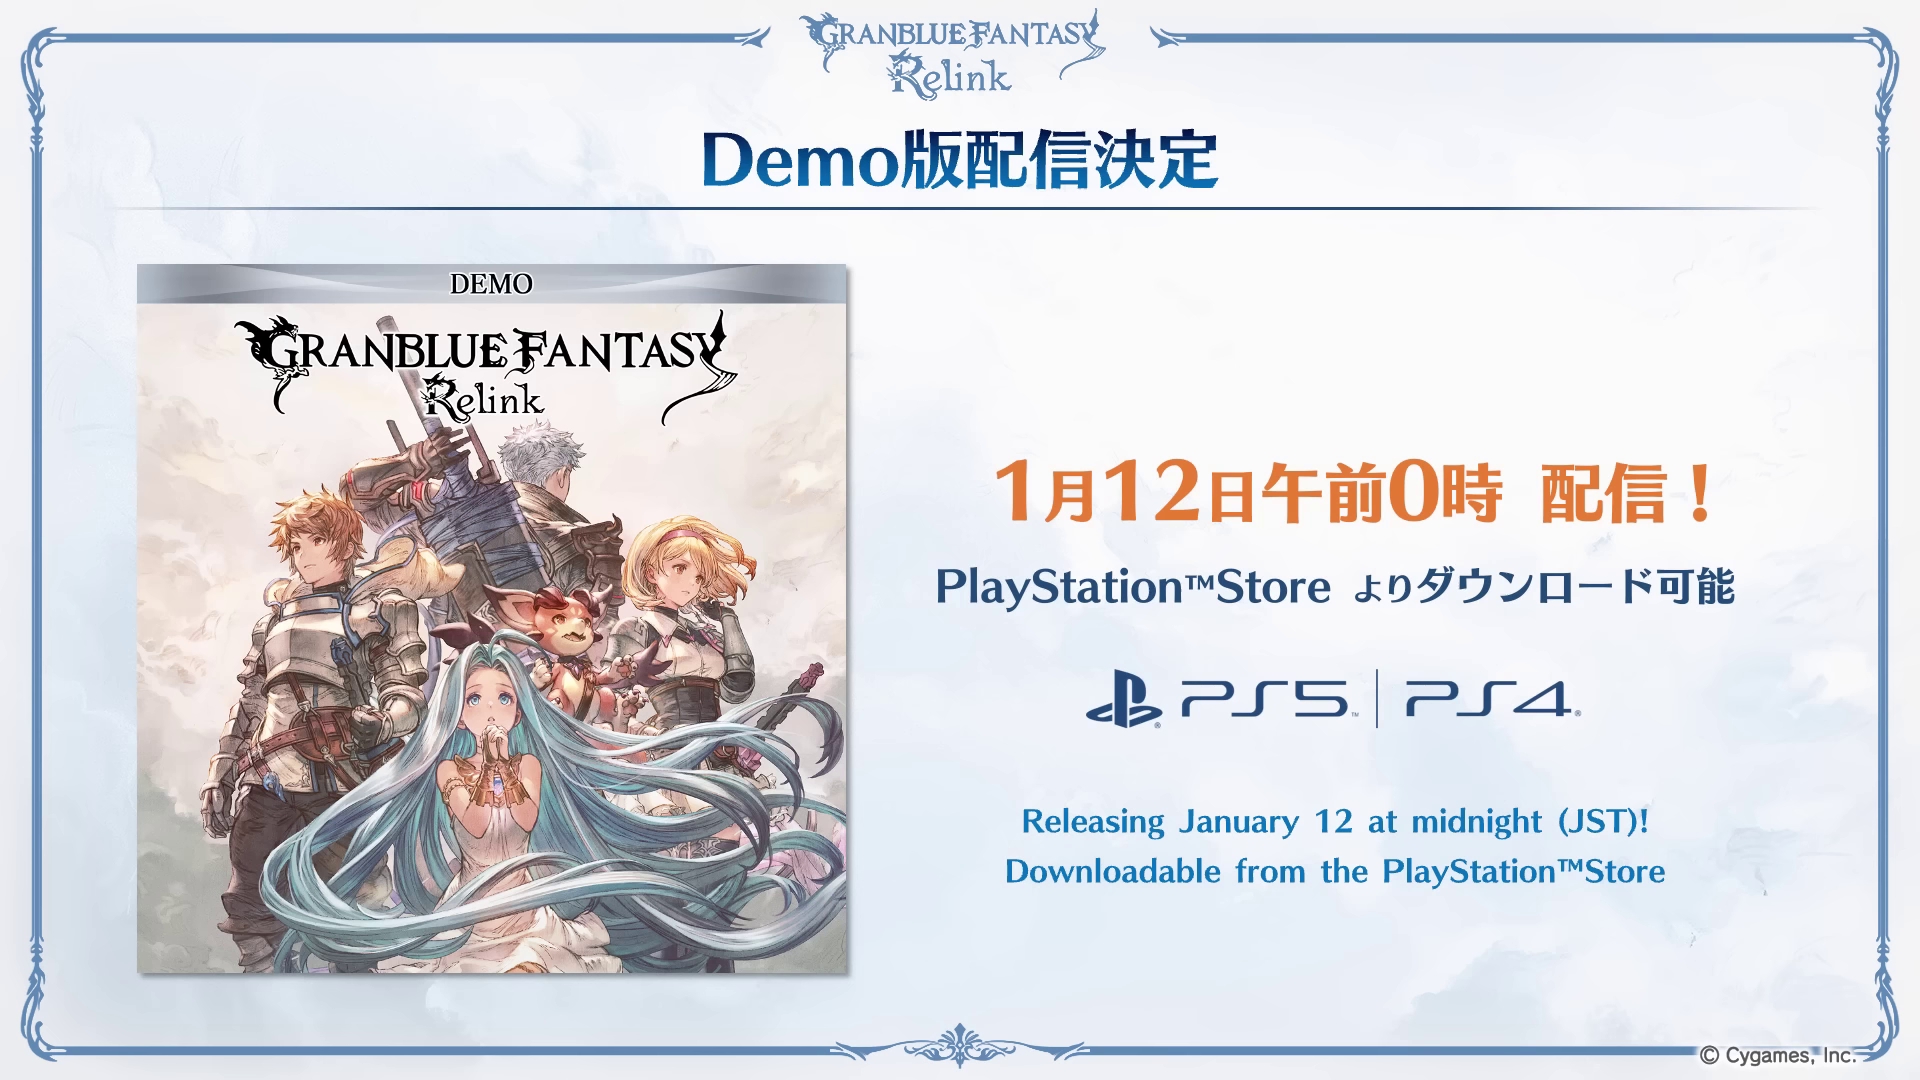 Granblue Fantasy: Relink PS5 and PS4 demo launches January 12